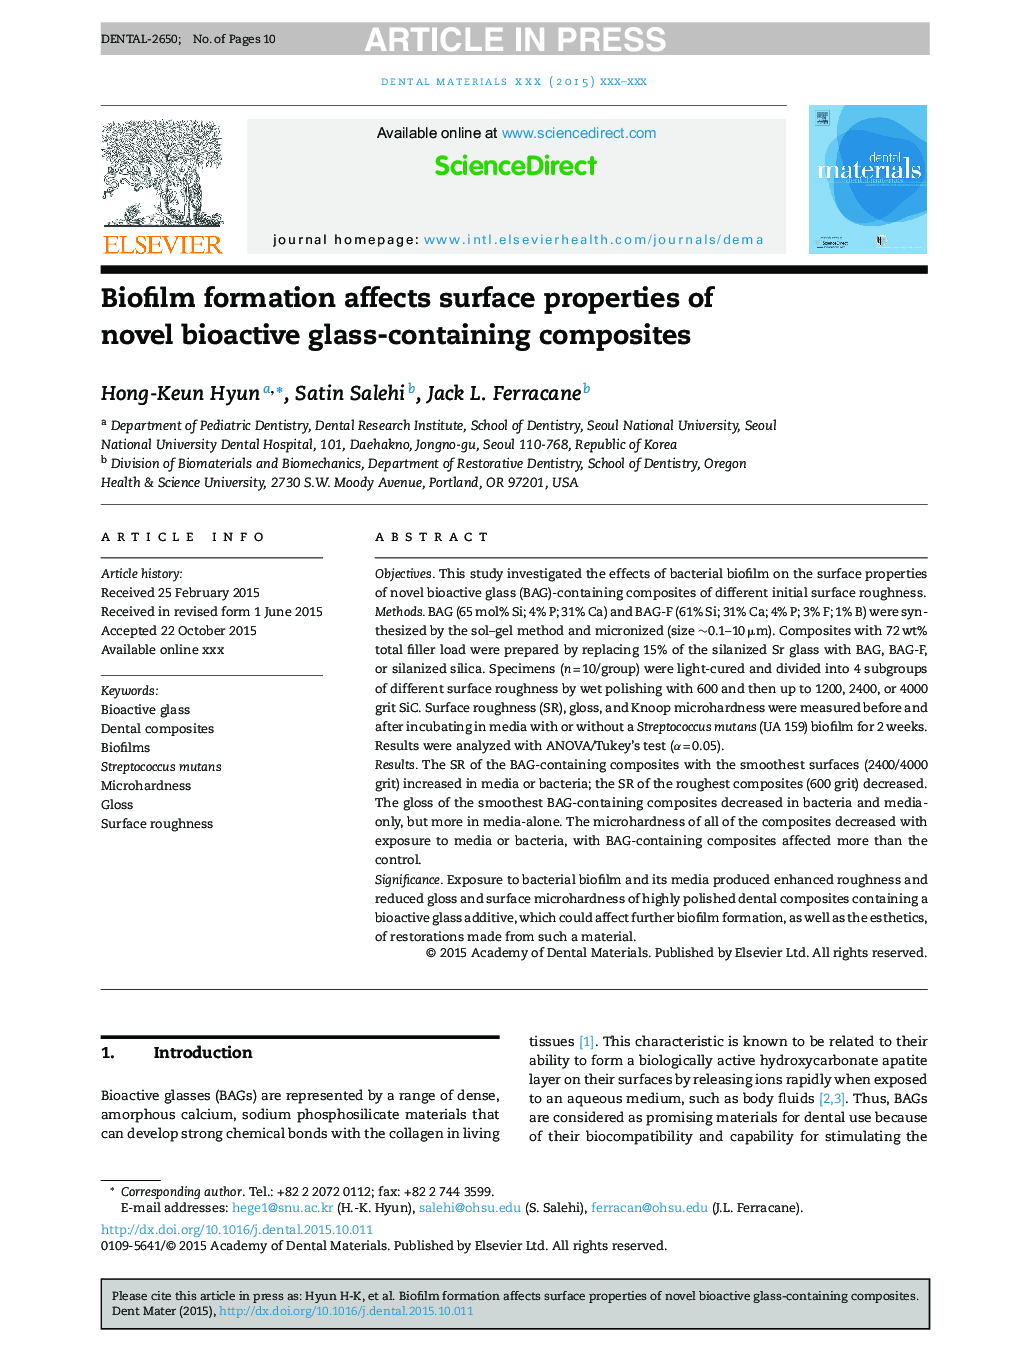 Biofilm formation affects surface properties of novel bioactive glass-containing composites